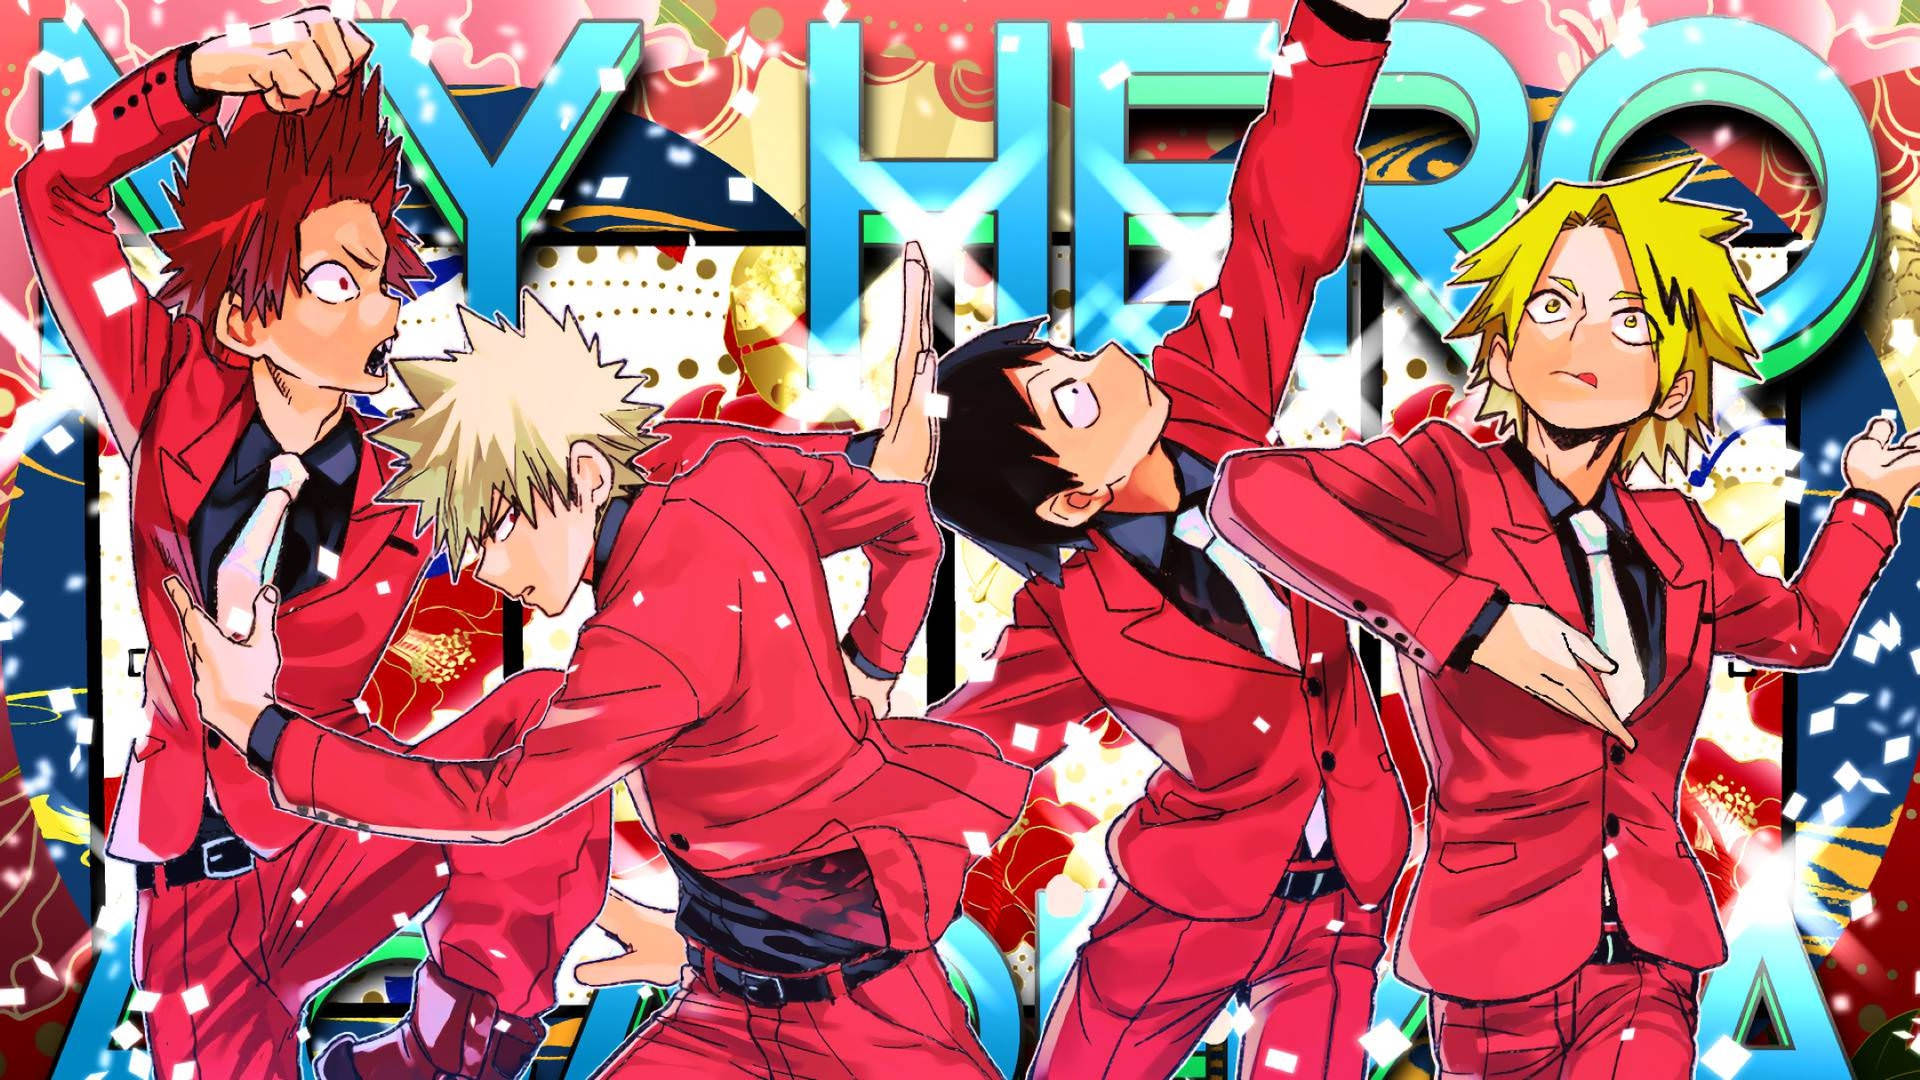 The Bakusquad Boys In Red